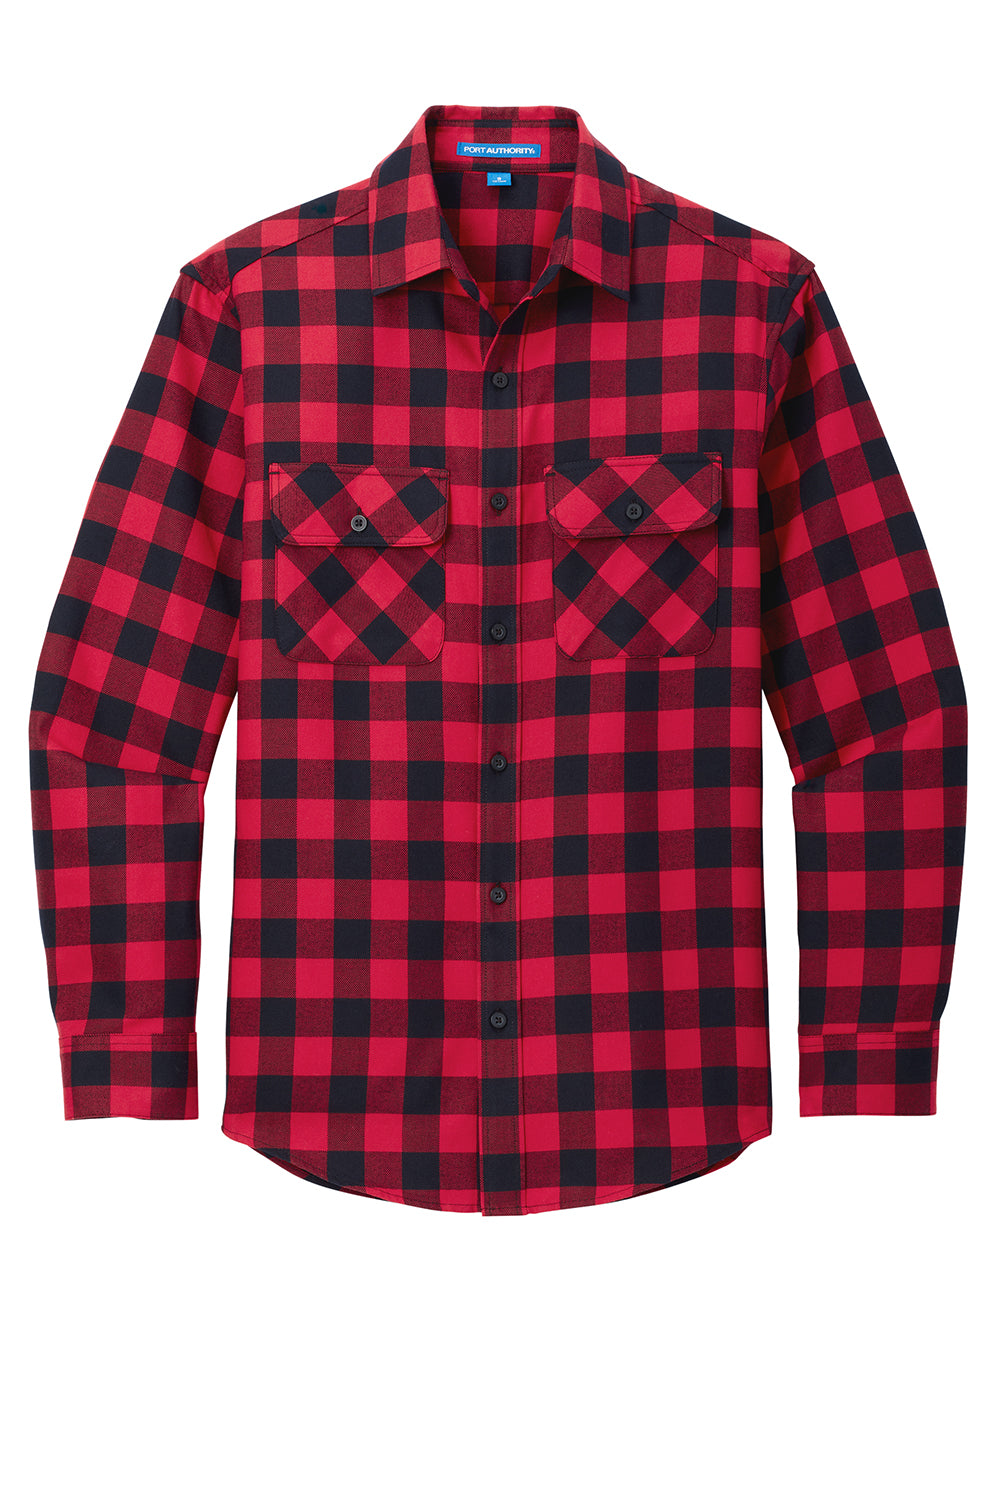 Port Authority W668 Mens Flannel Long Sleeve Button Down Shirt w/ Double Pockets Red/Black Buffalo Flat Front